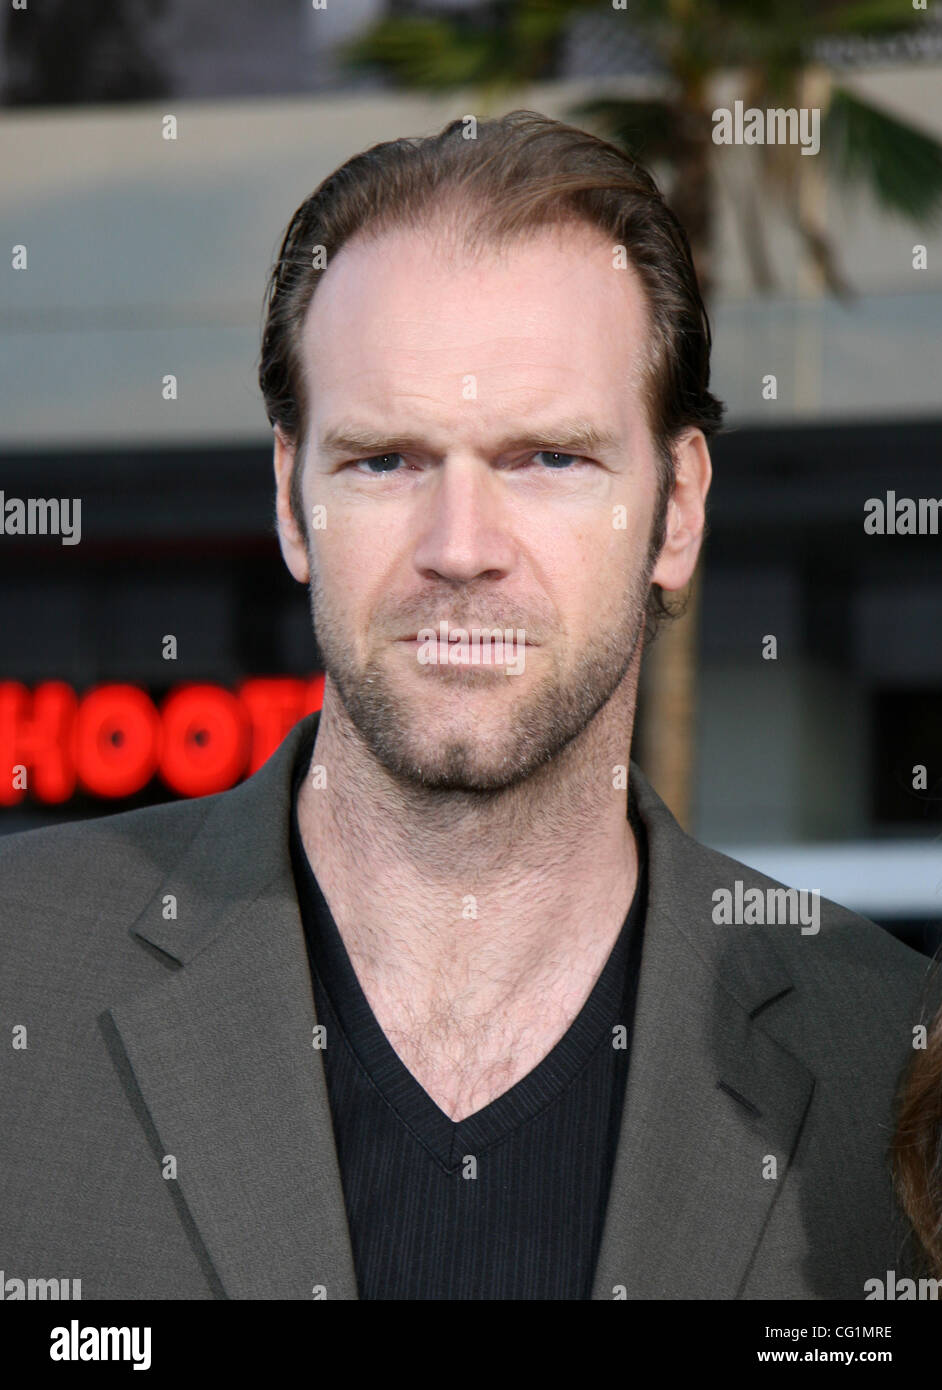 Aug 23, 2007 - Hollywood, CA, USA - TYLER MANE arriving at the world premiere of the film 'Halloween' held at Grauman's Chinese Theater in Hollywood. (Credit Image: © Camilla Zenz/ZUMA Press) Stock Photo